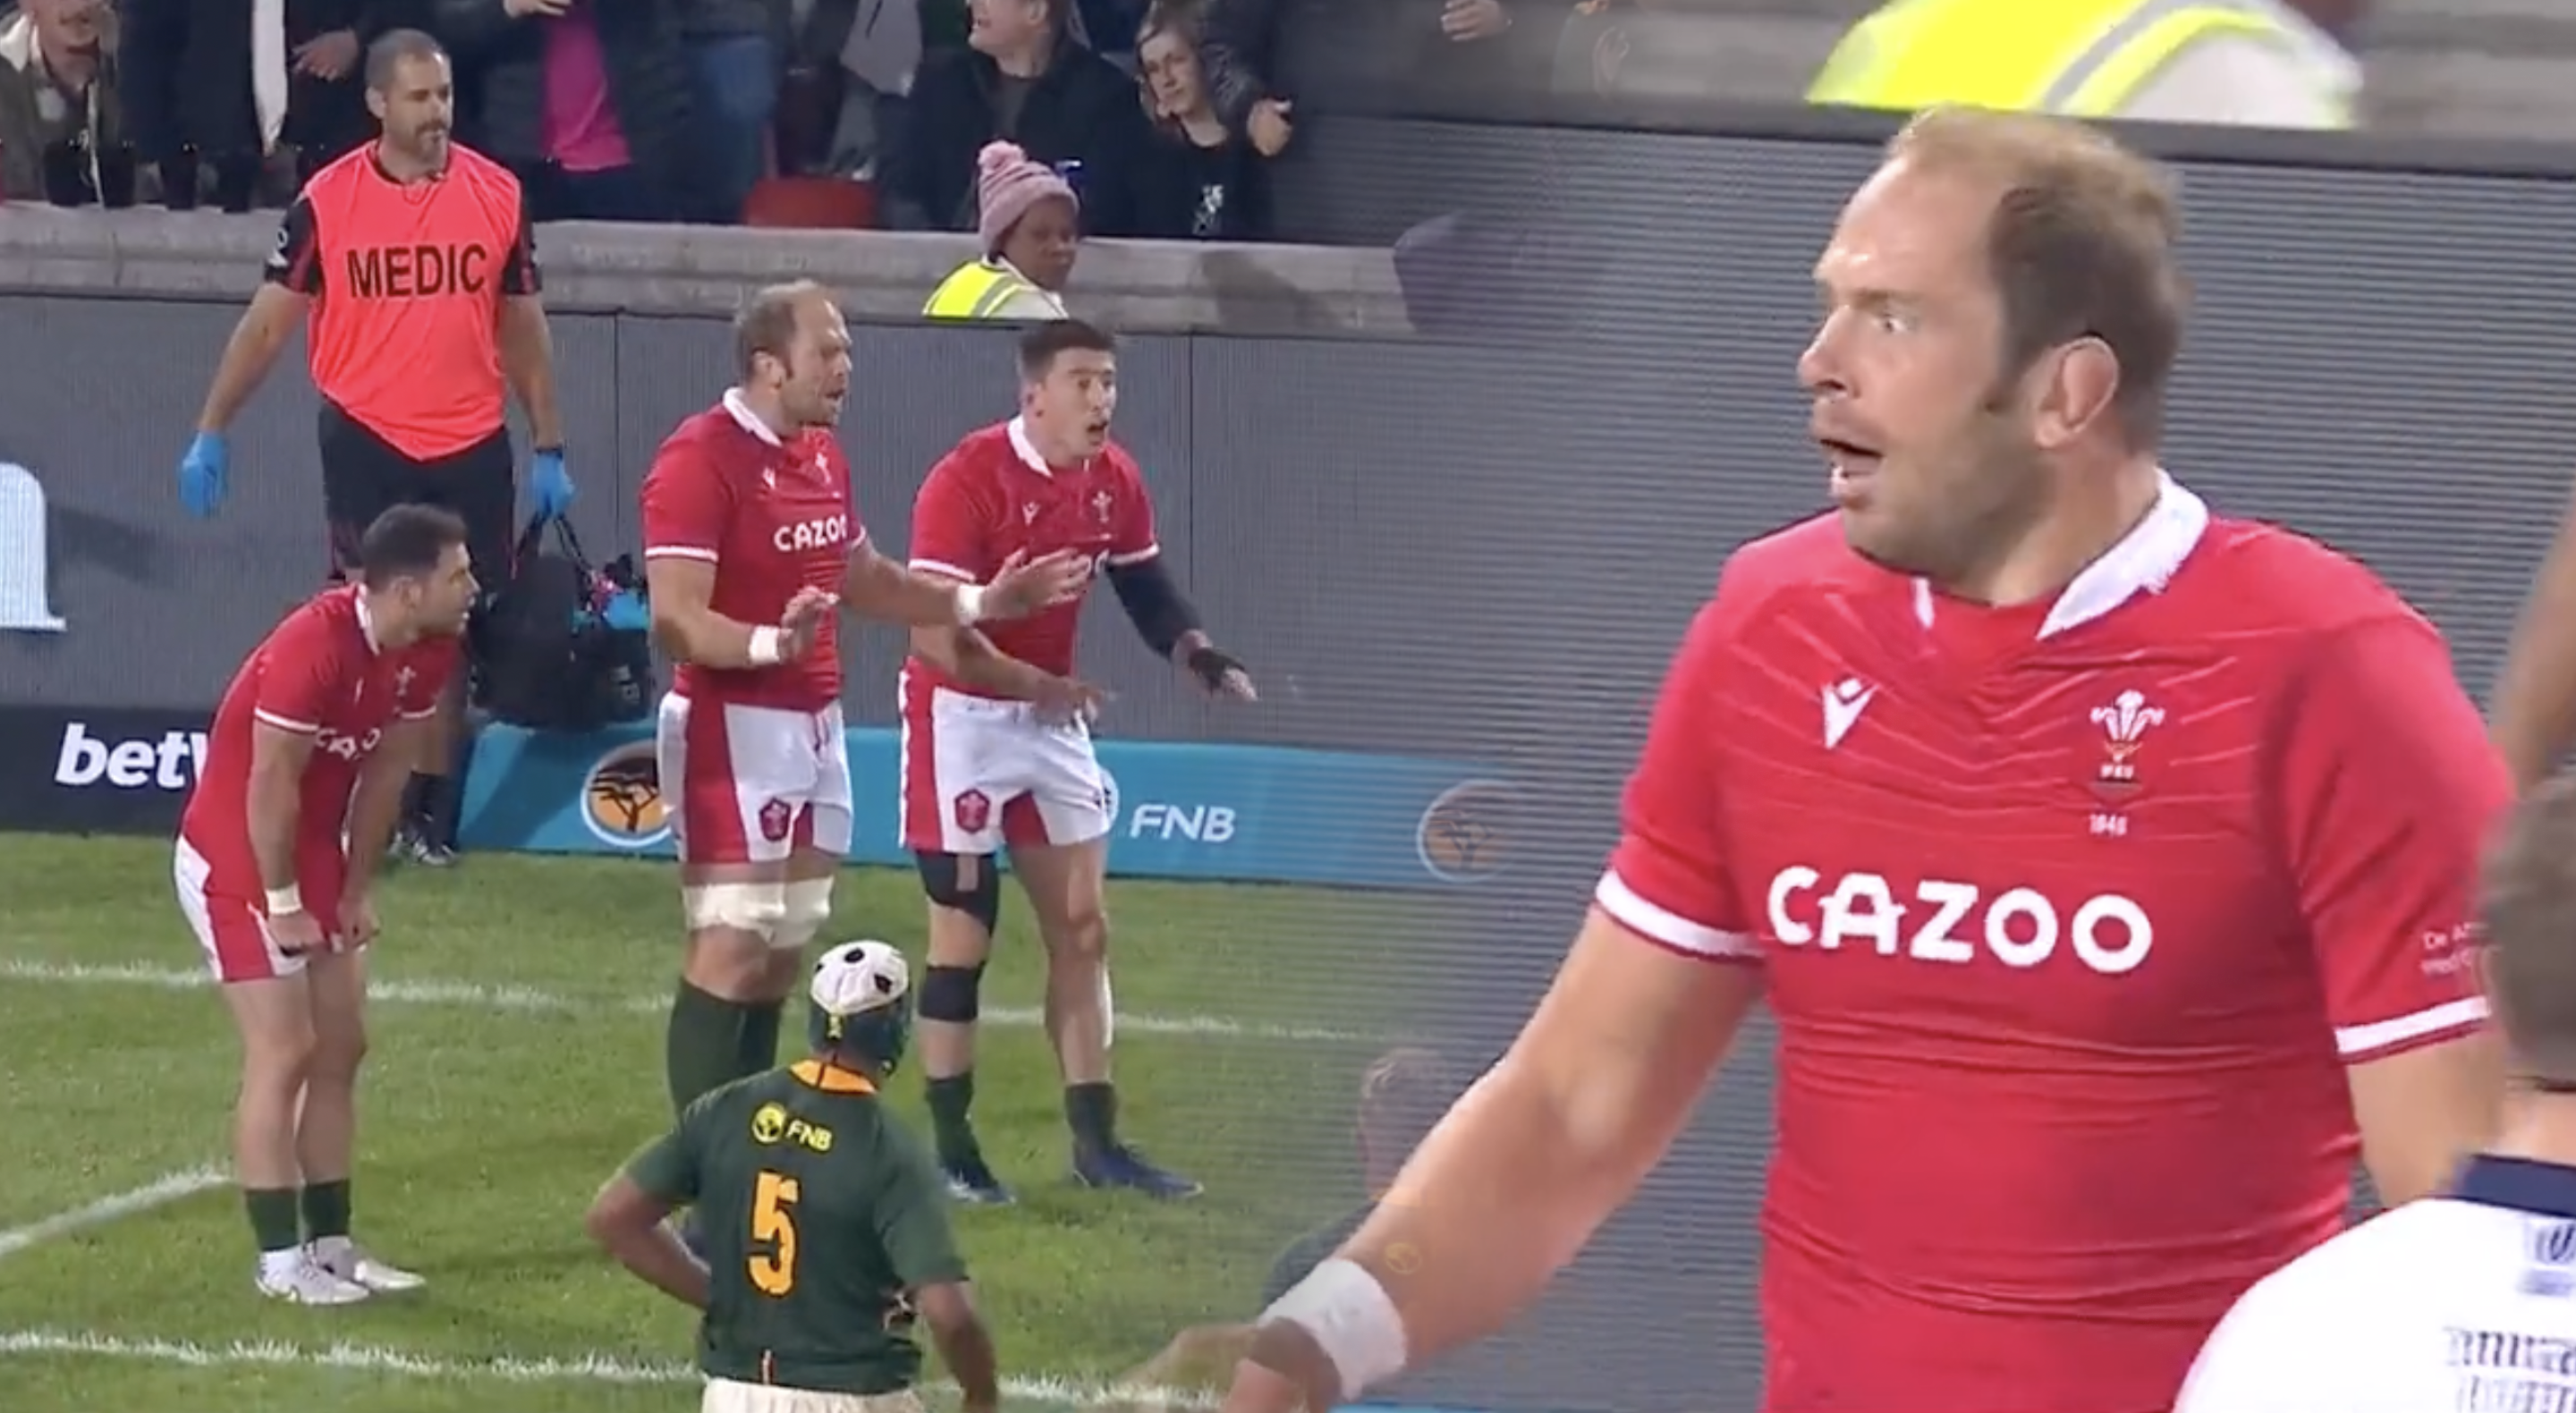 New angle shows Alun Wyn Jones fooled the entire world with shameful acting